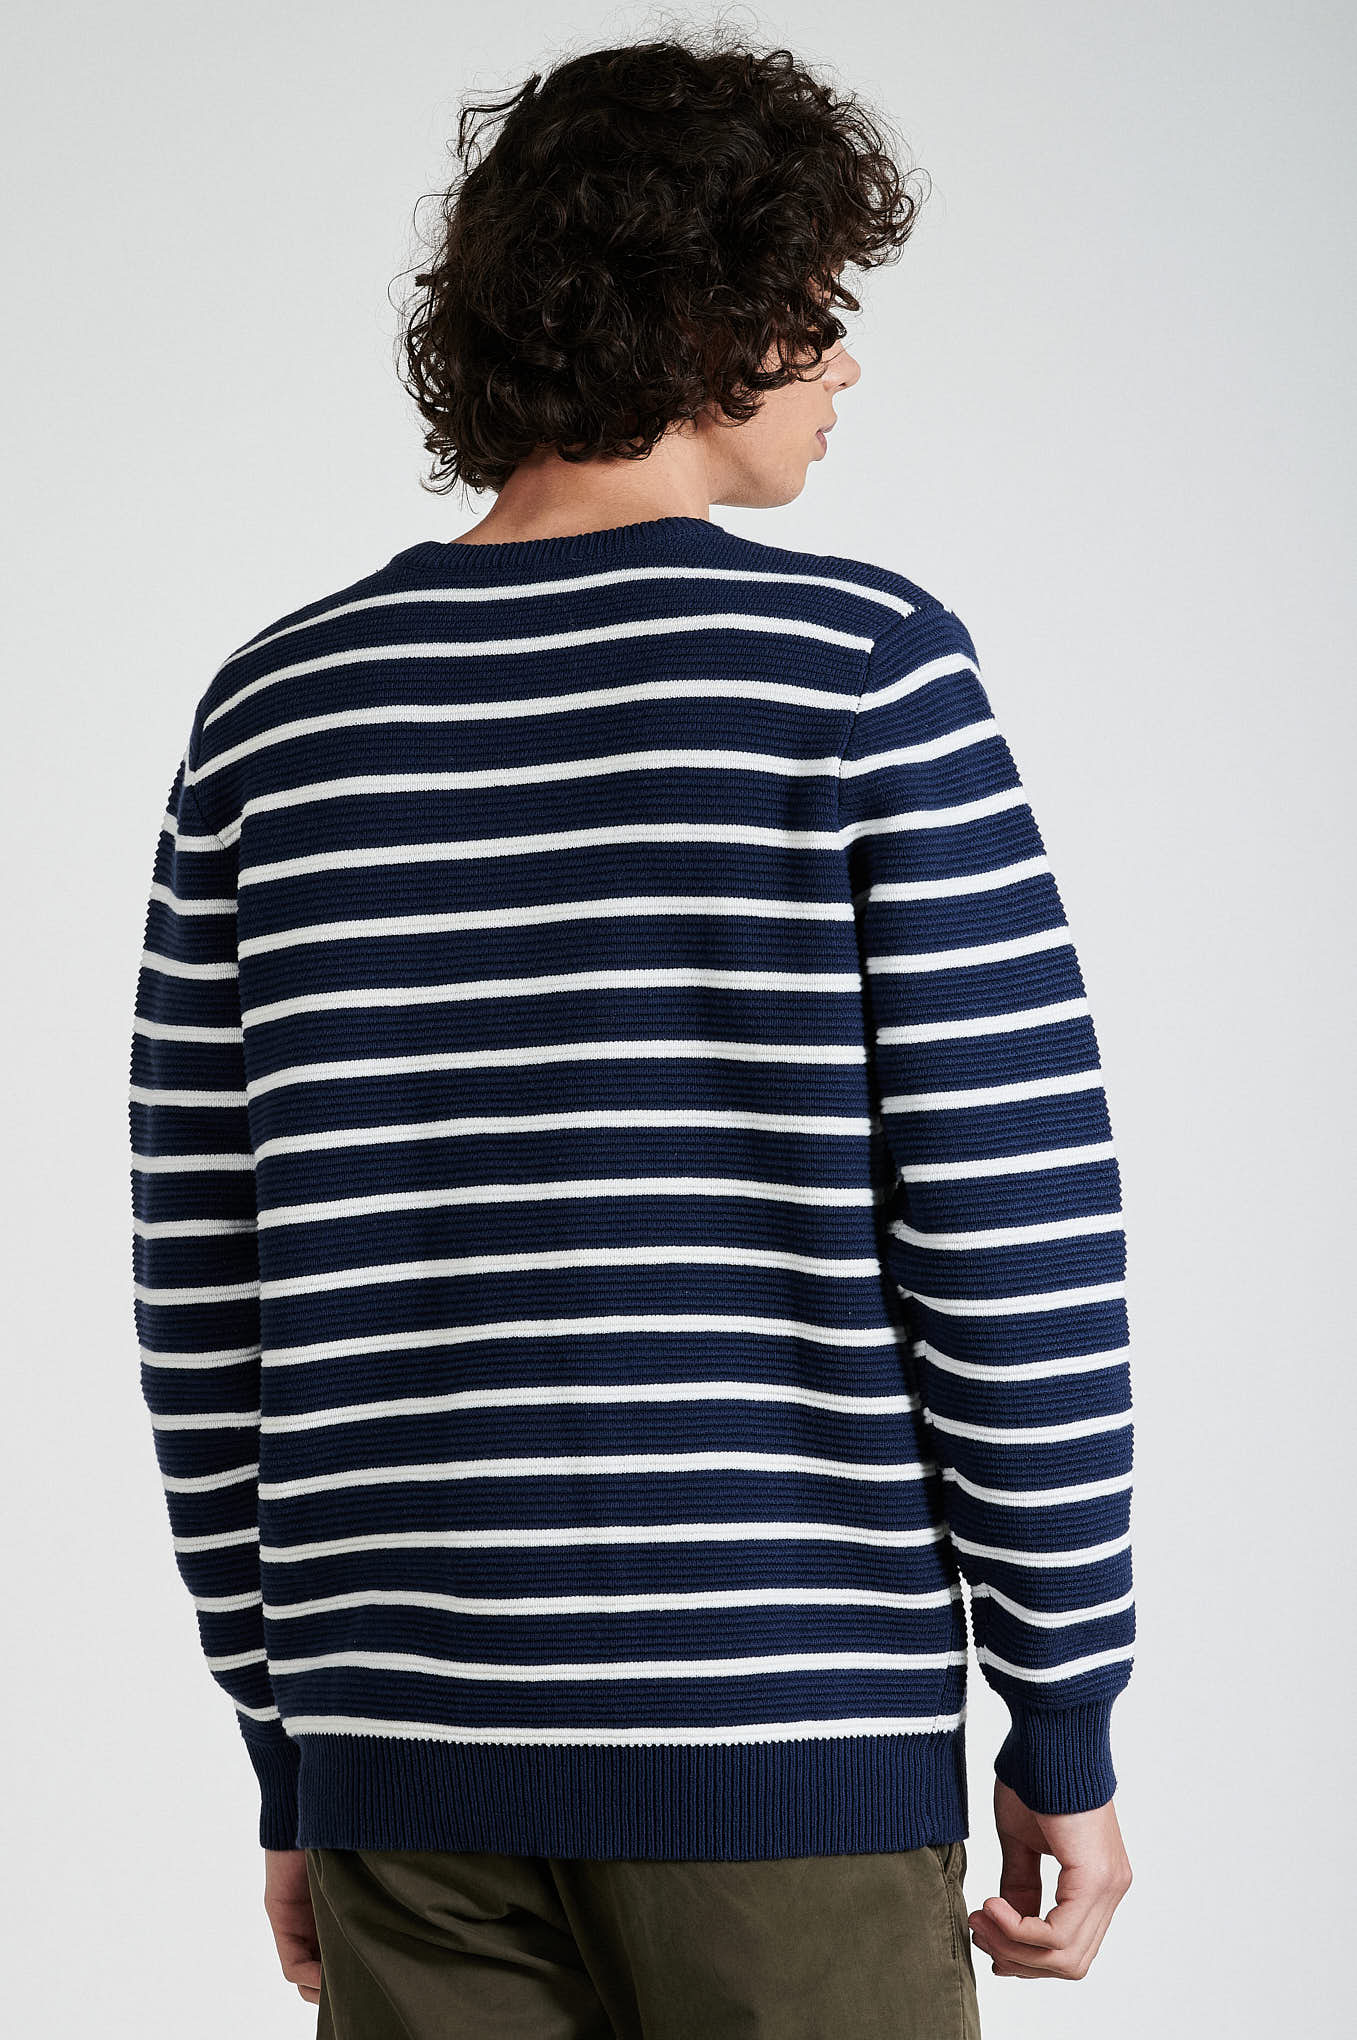 Sweater Stripes Casual Man